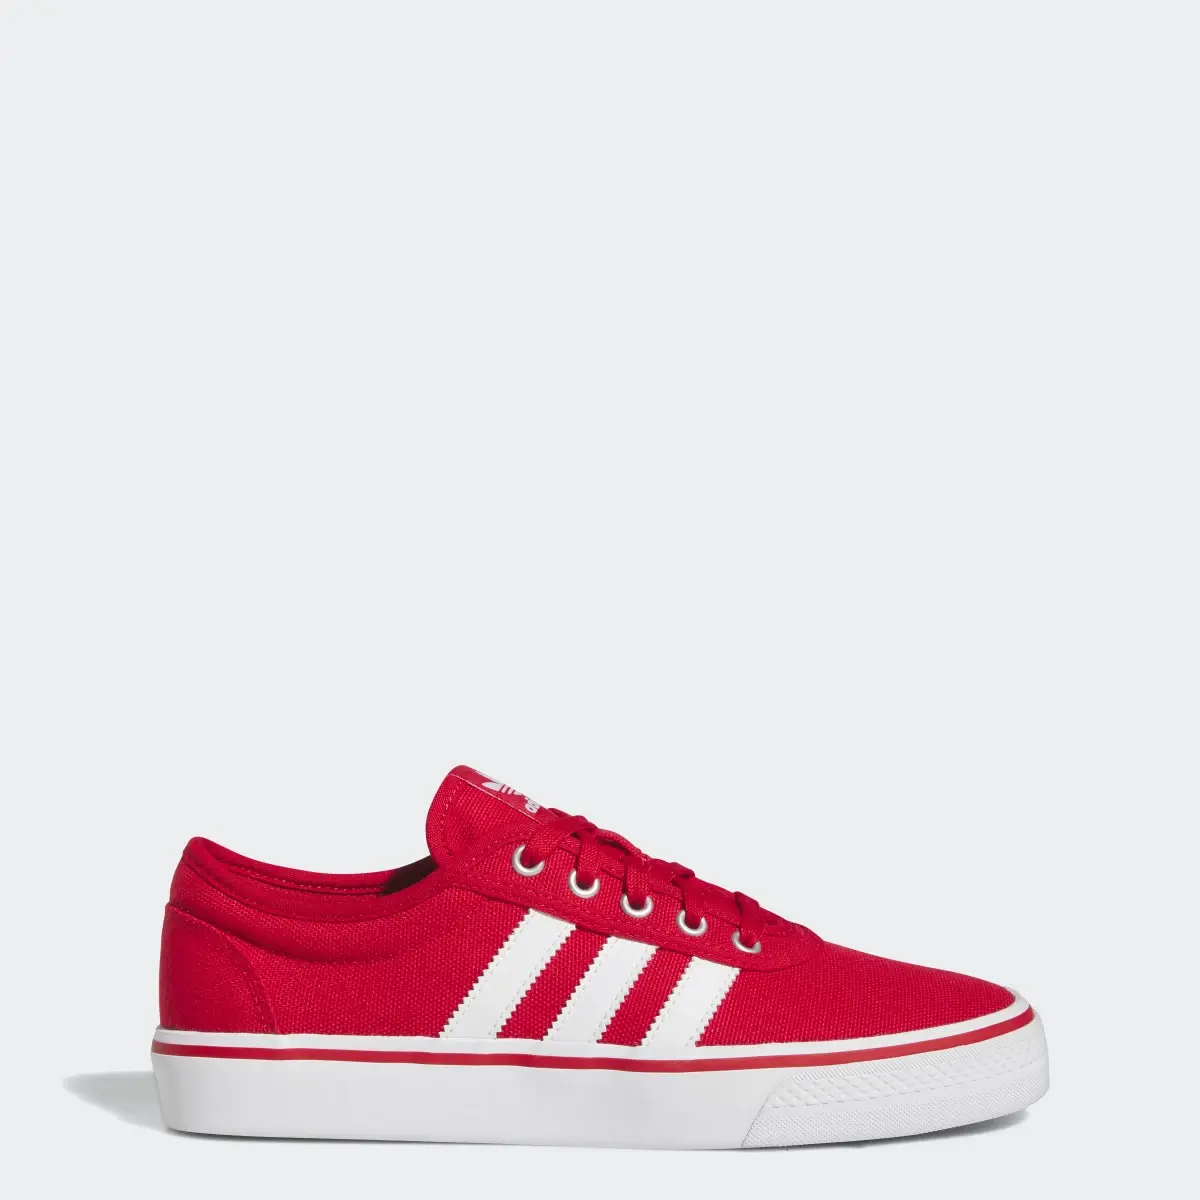 Adidas Adiease Shoes. 1